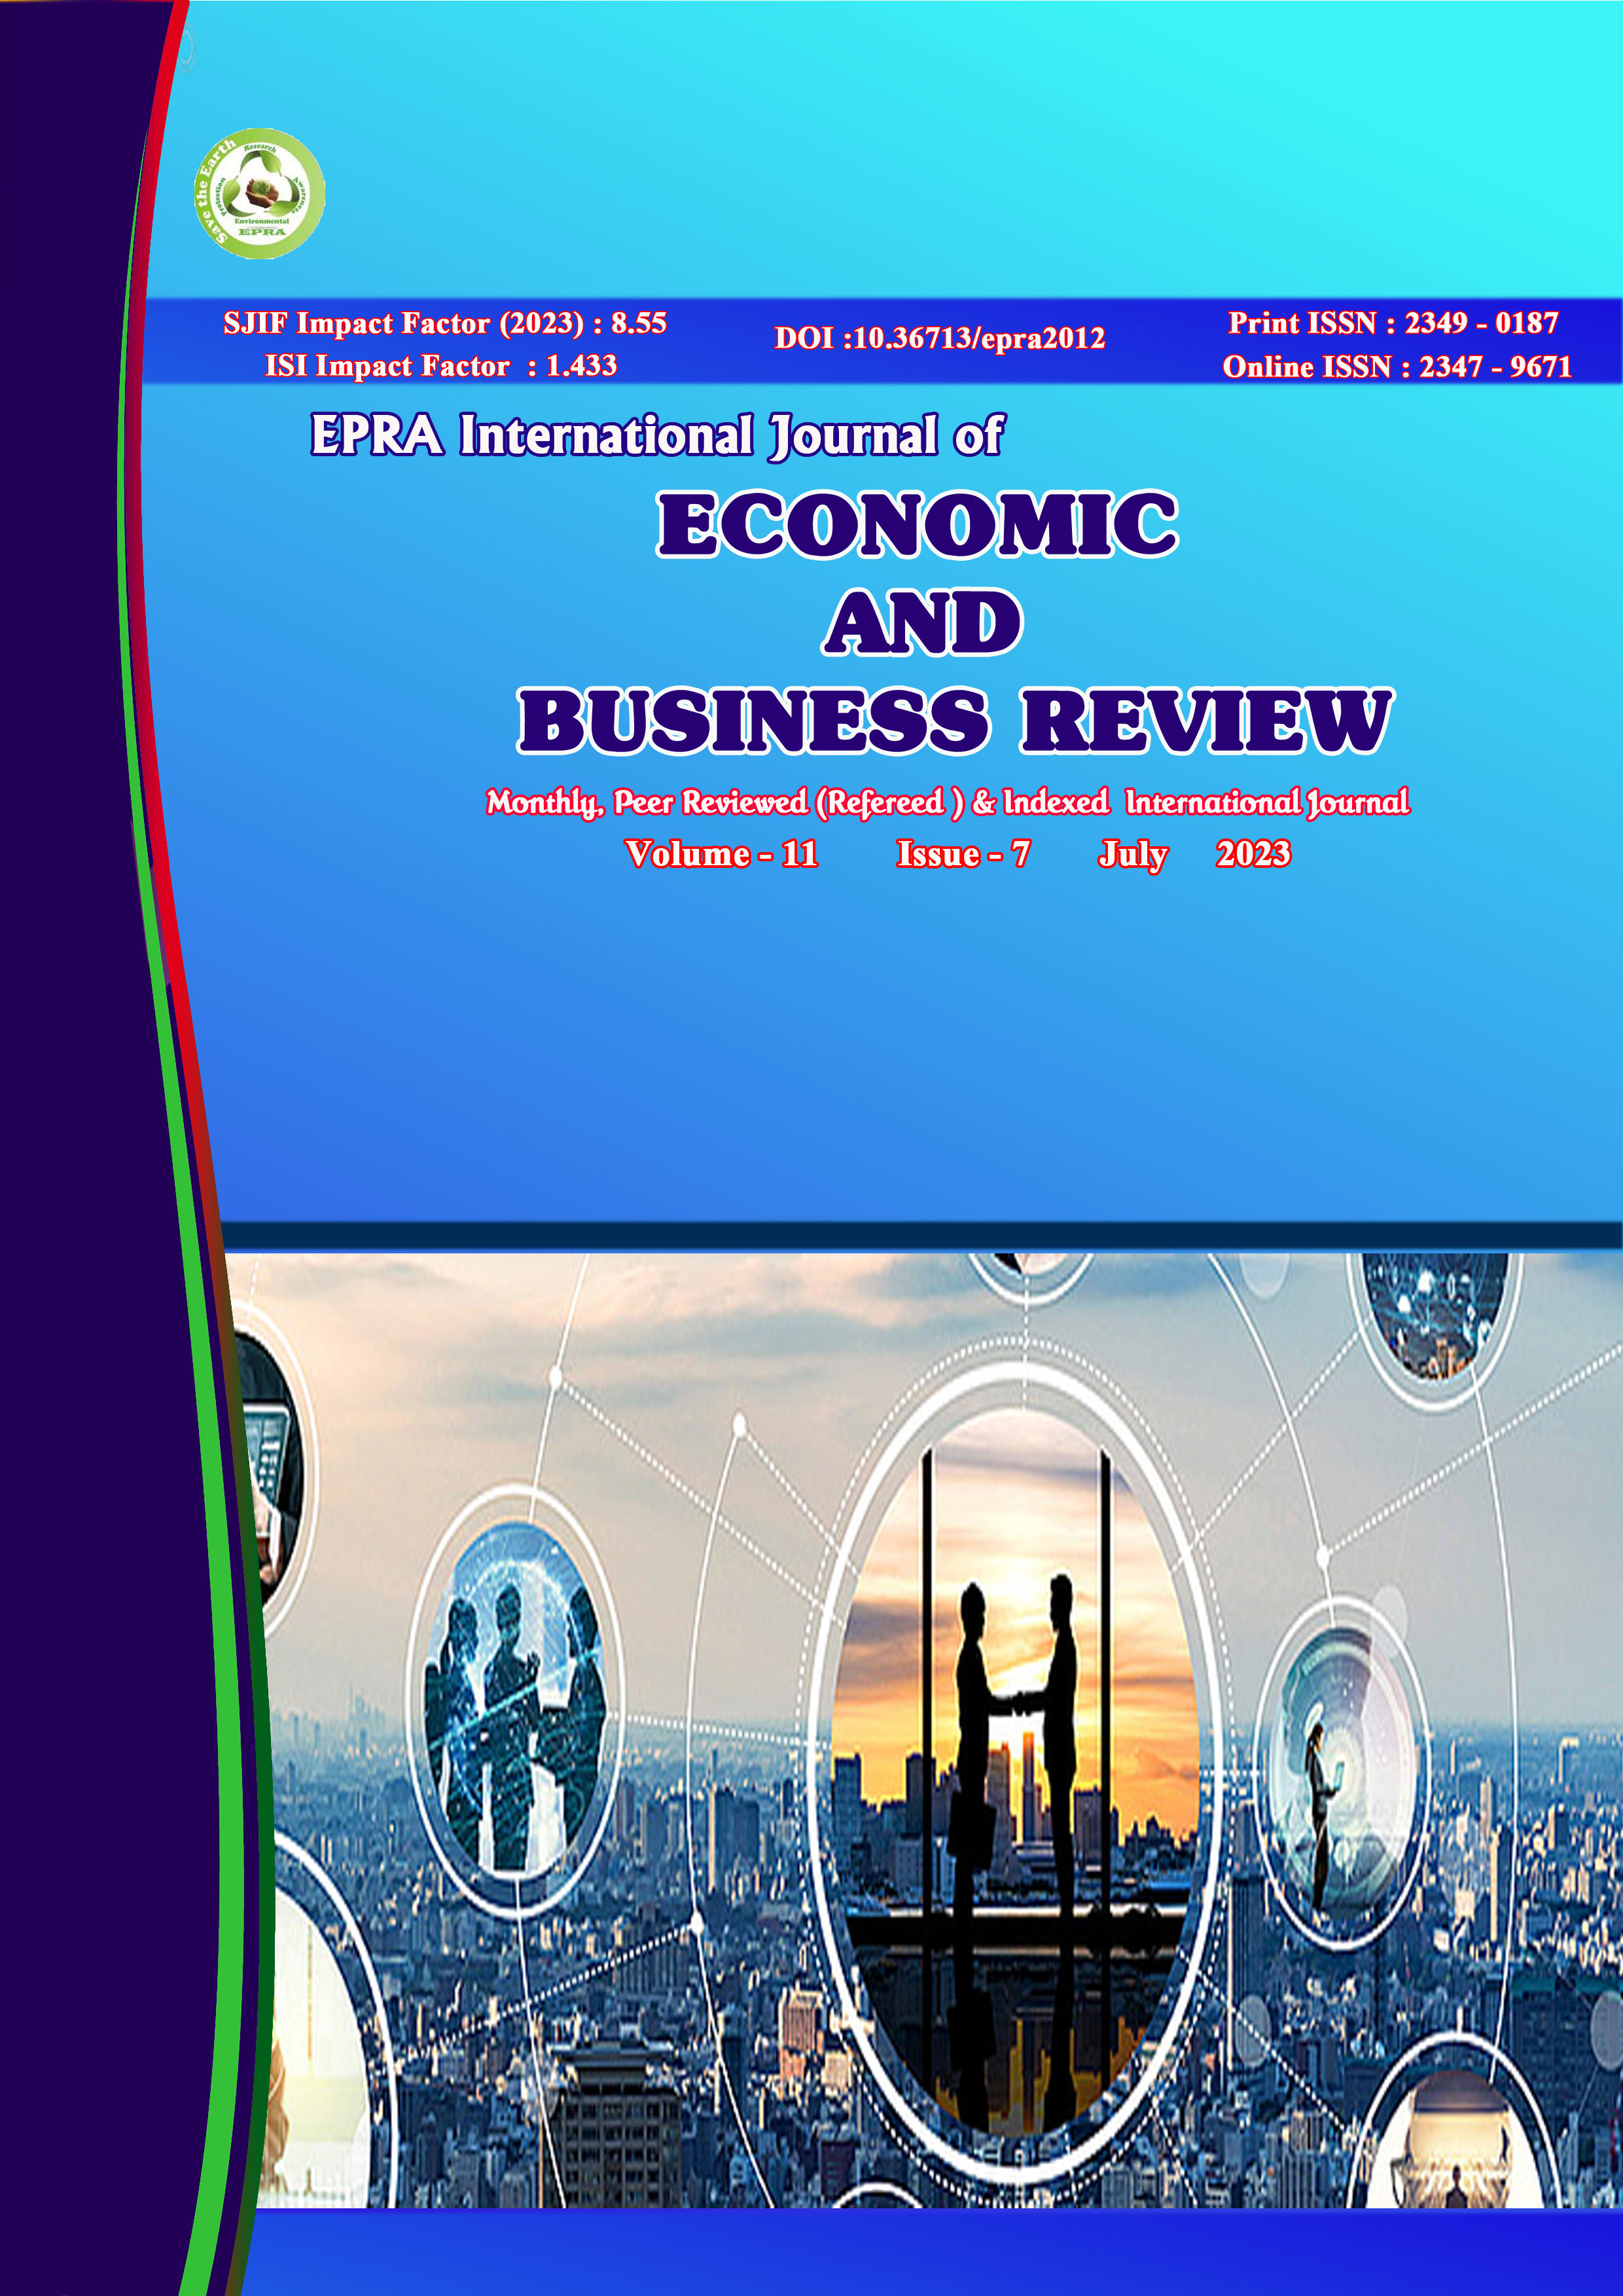 					View Vol. 11 No. 7 (2023): EPRA International Journal of Economic and Business Review(JEBR)
				